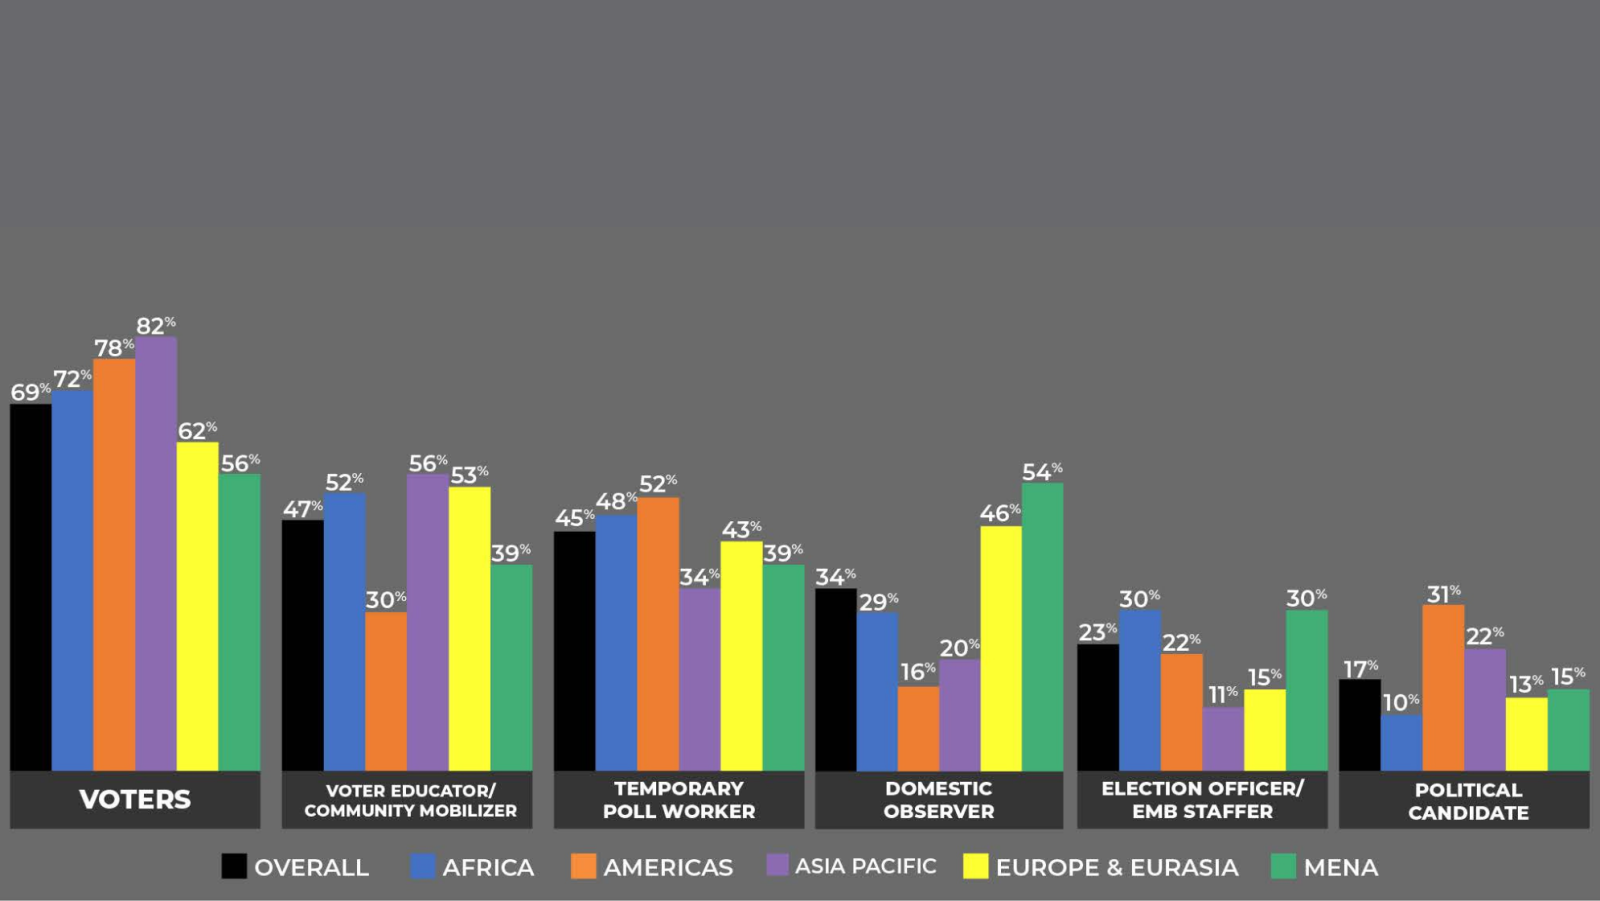 Figure 16 Young People's Observed Electoral Engagement, by Region As voters: 69% overall, 72% from Africa, 78% from Americas, 82% from Asian and Pacific, 62% from Europe and Eurasia, and 56% from MENA. As voter educator/ community mobilizer: 47% overall, 52% from Africa, 30% from Americas, 56% from Asian and Pacific, 53% from Europe and Eurasia, and 39% from MENA. As temporary poll worker: 45% overall, 48% from Africa, 52% from Americas, 34% from Asian and Pacific, 43% from Europe and Eurasia, and 39% from 